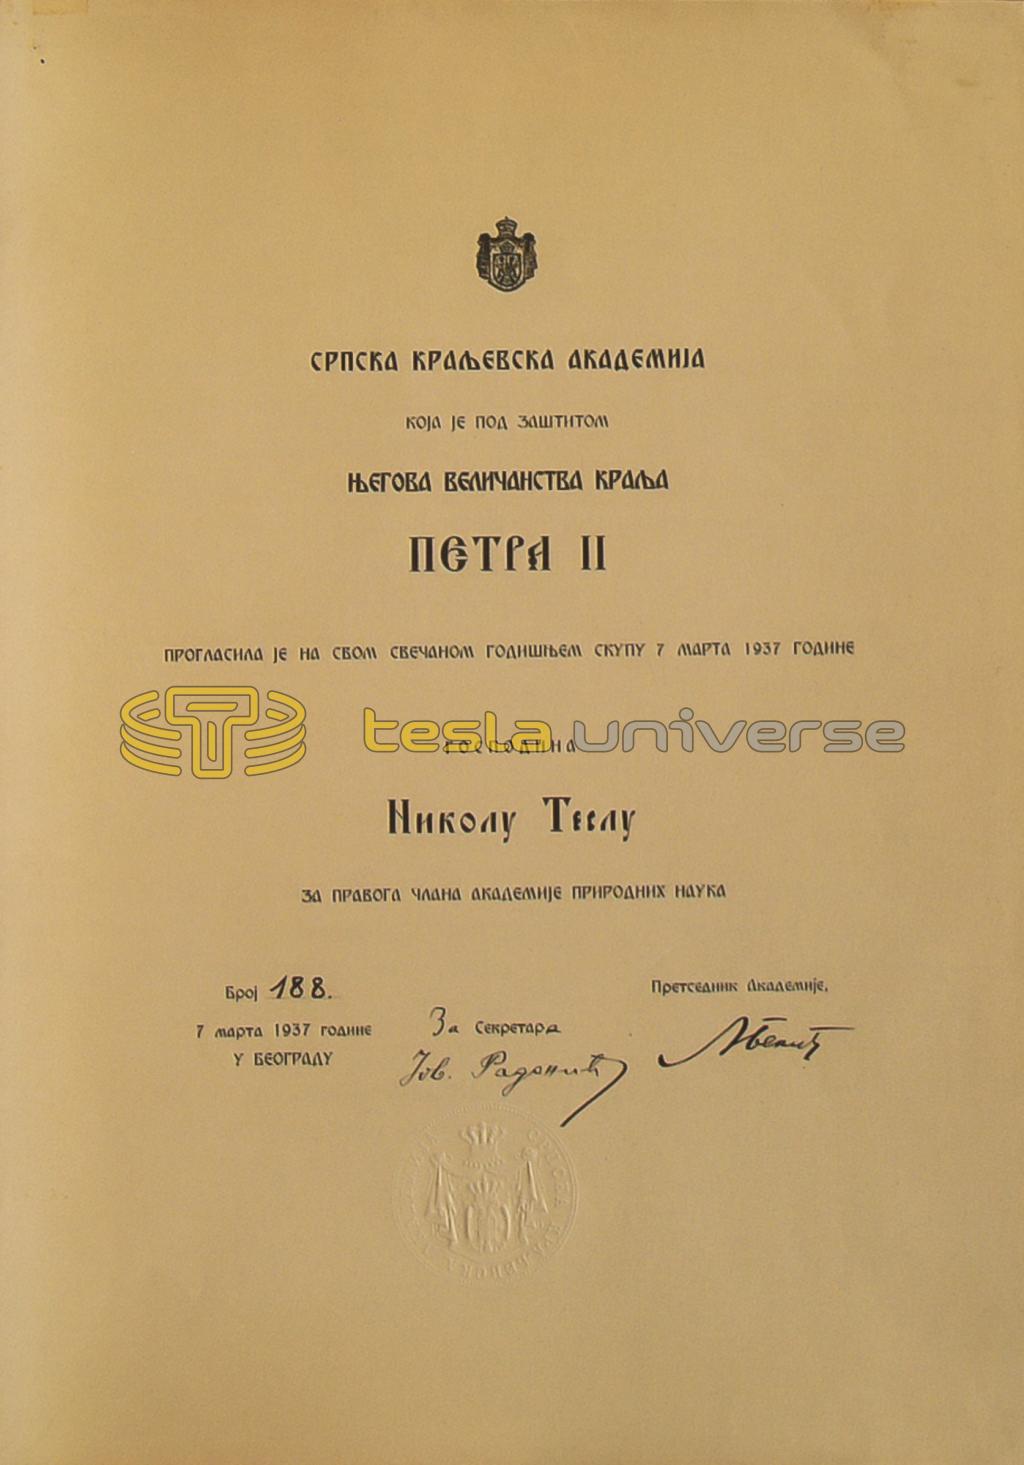 Certificate of permanent membership of the Serbian Royal Academy awarded to Tesla